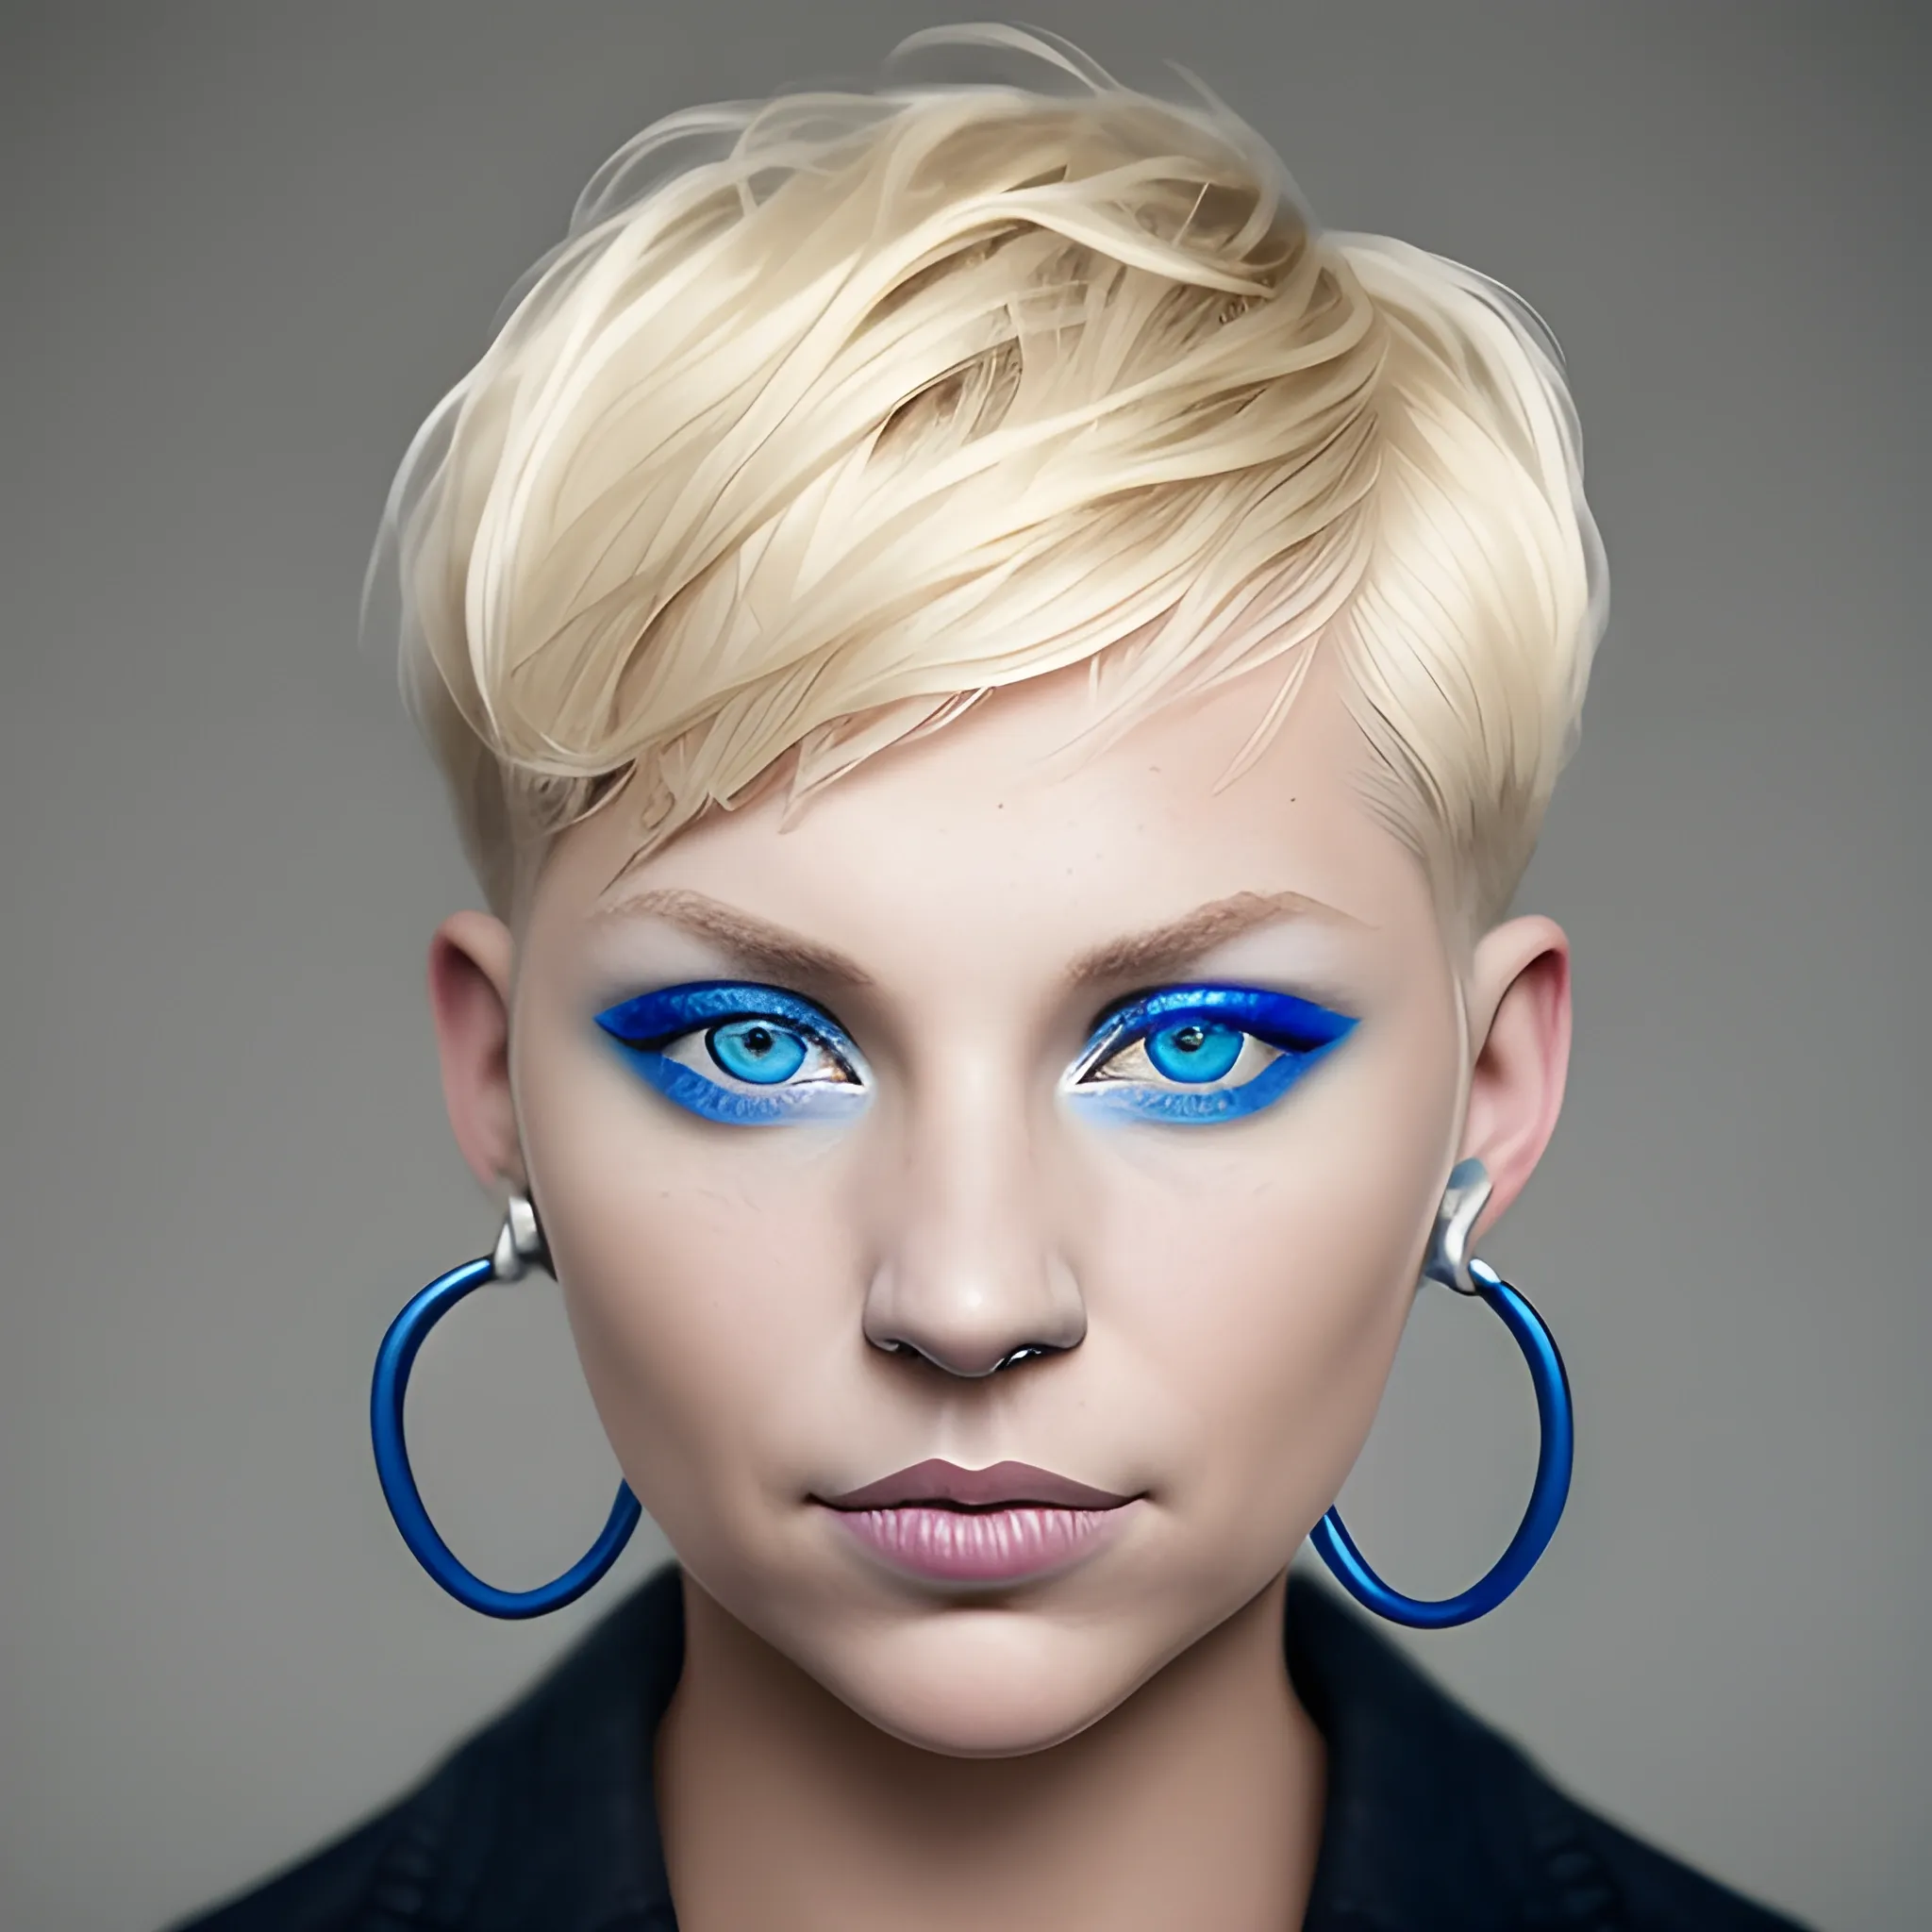 A woman with short blonde hair, septum ring, blue eyes portrait